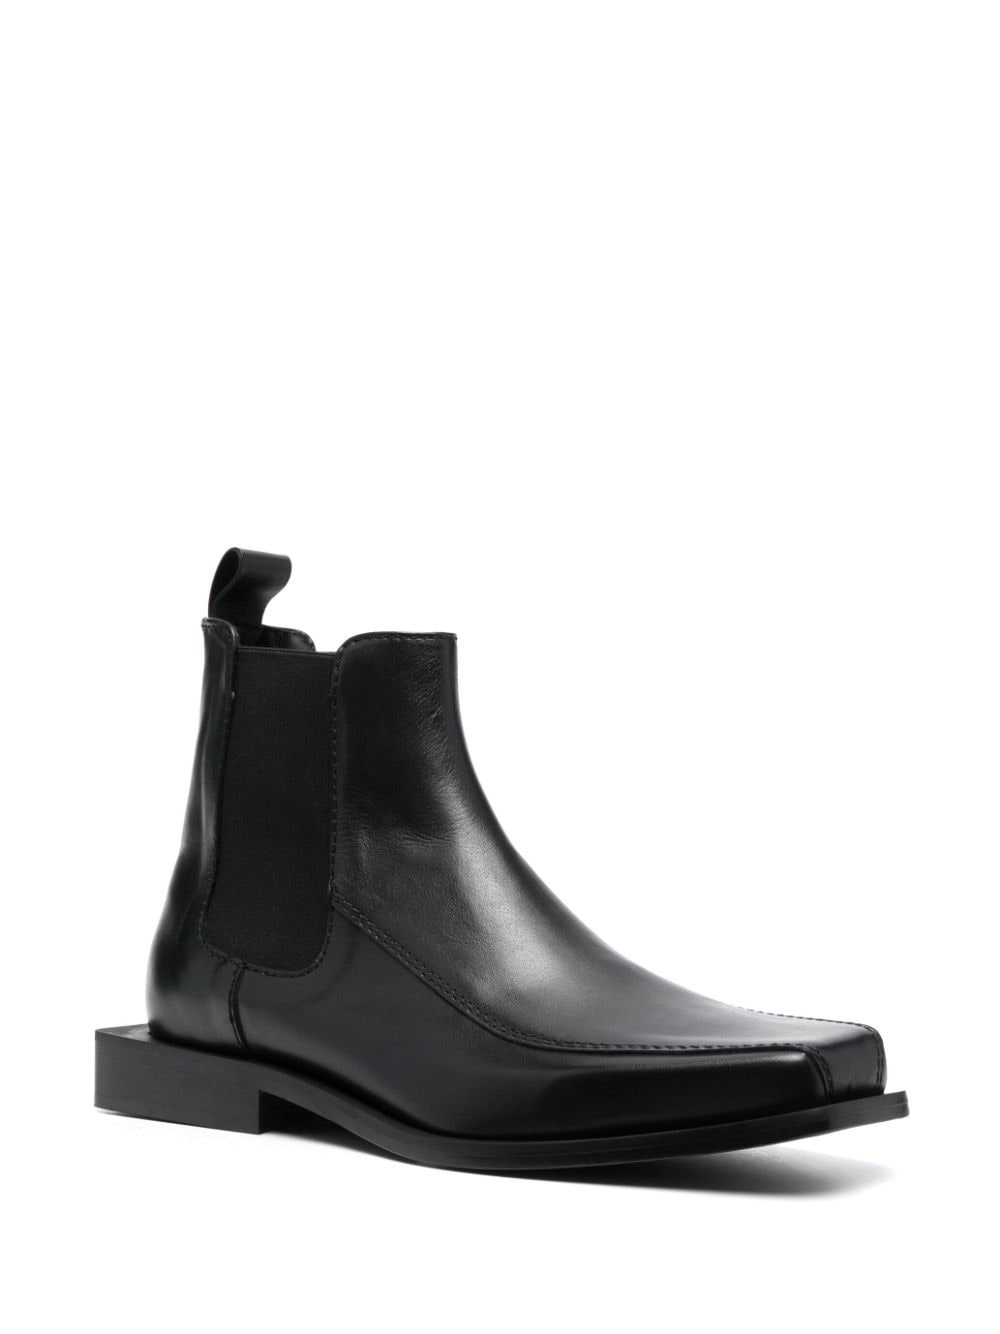 Tabali leather ankle boots - 2